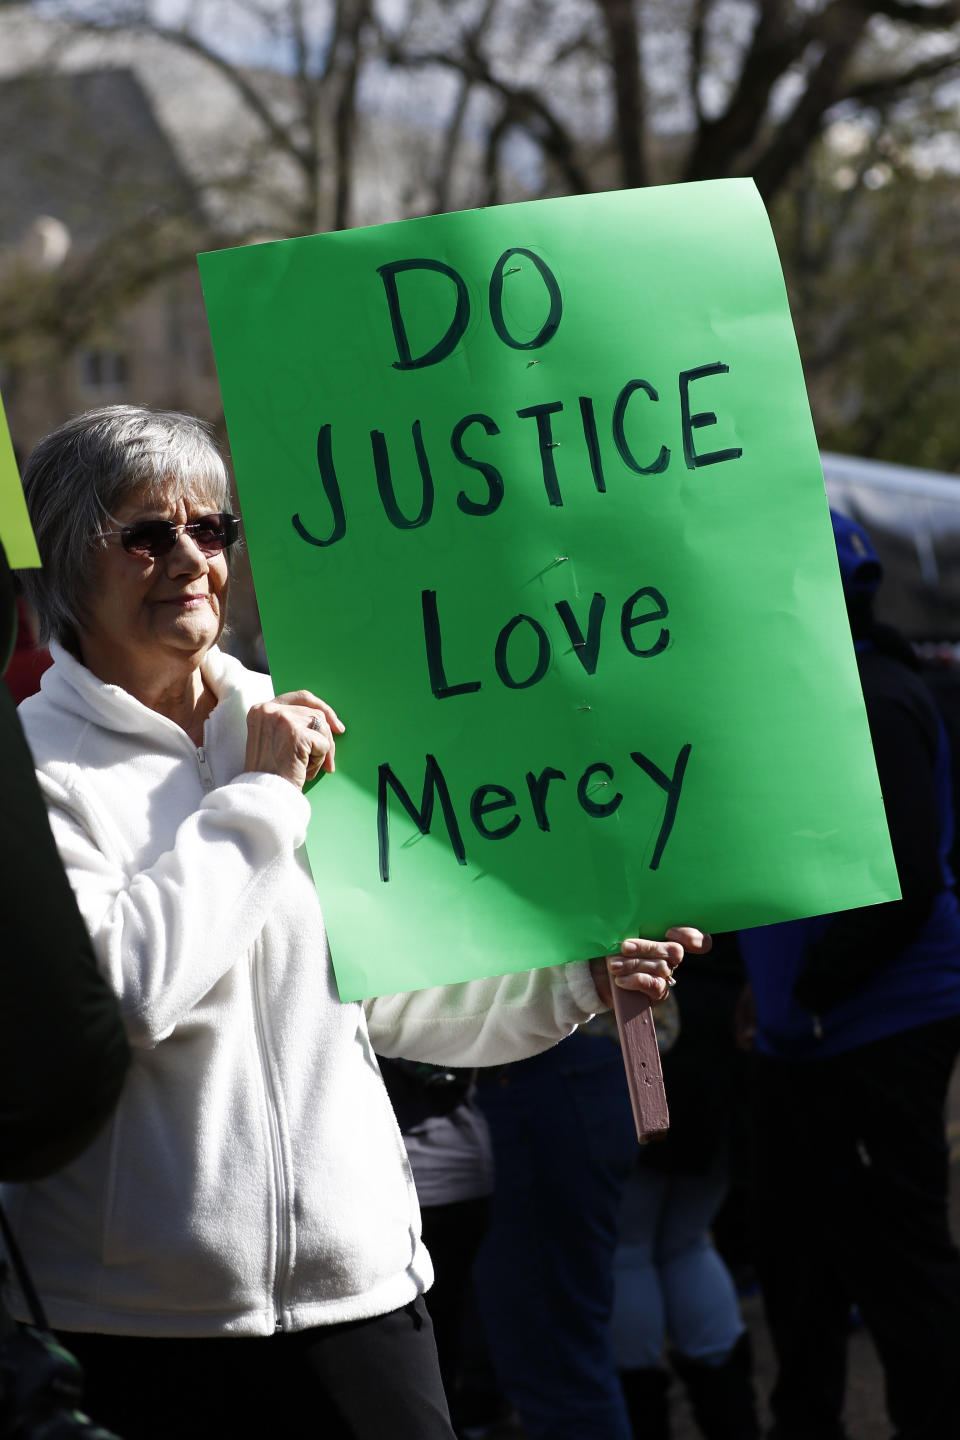 Martha Lightsey of Wesson, Miss., holds a homemade sign calling for justice, love and mercy at a mass gathering in front of the Mississippi Capitol in Jackson, Friday, Jan. 24, 2020, to protest conditions in prisons where inmates have been killed in violent clashes in recent weeks. (AP Photo/Rogelio V. Solis)